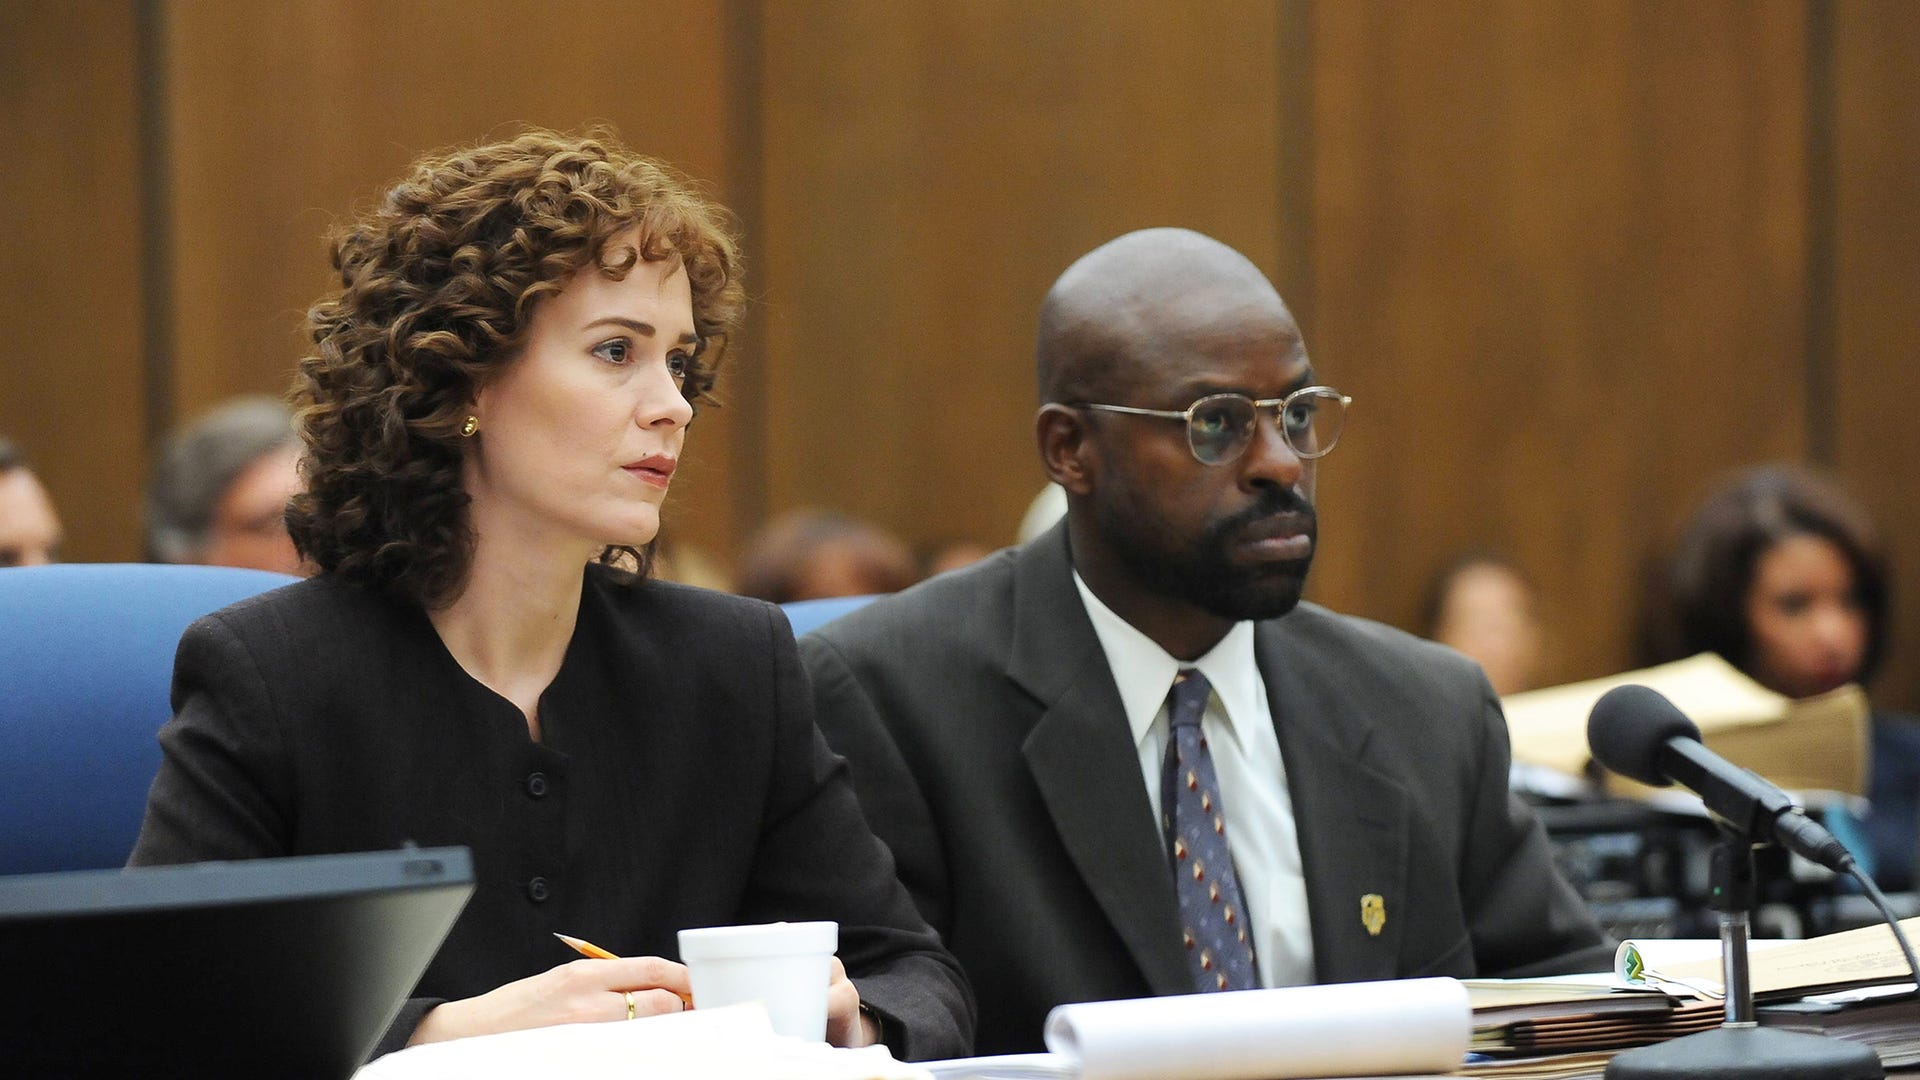 Sarah Paulson and Sterling K. Brown, The People v. O.J. Simpson: American Crime Story